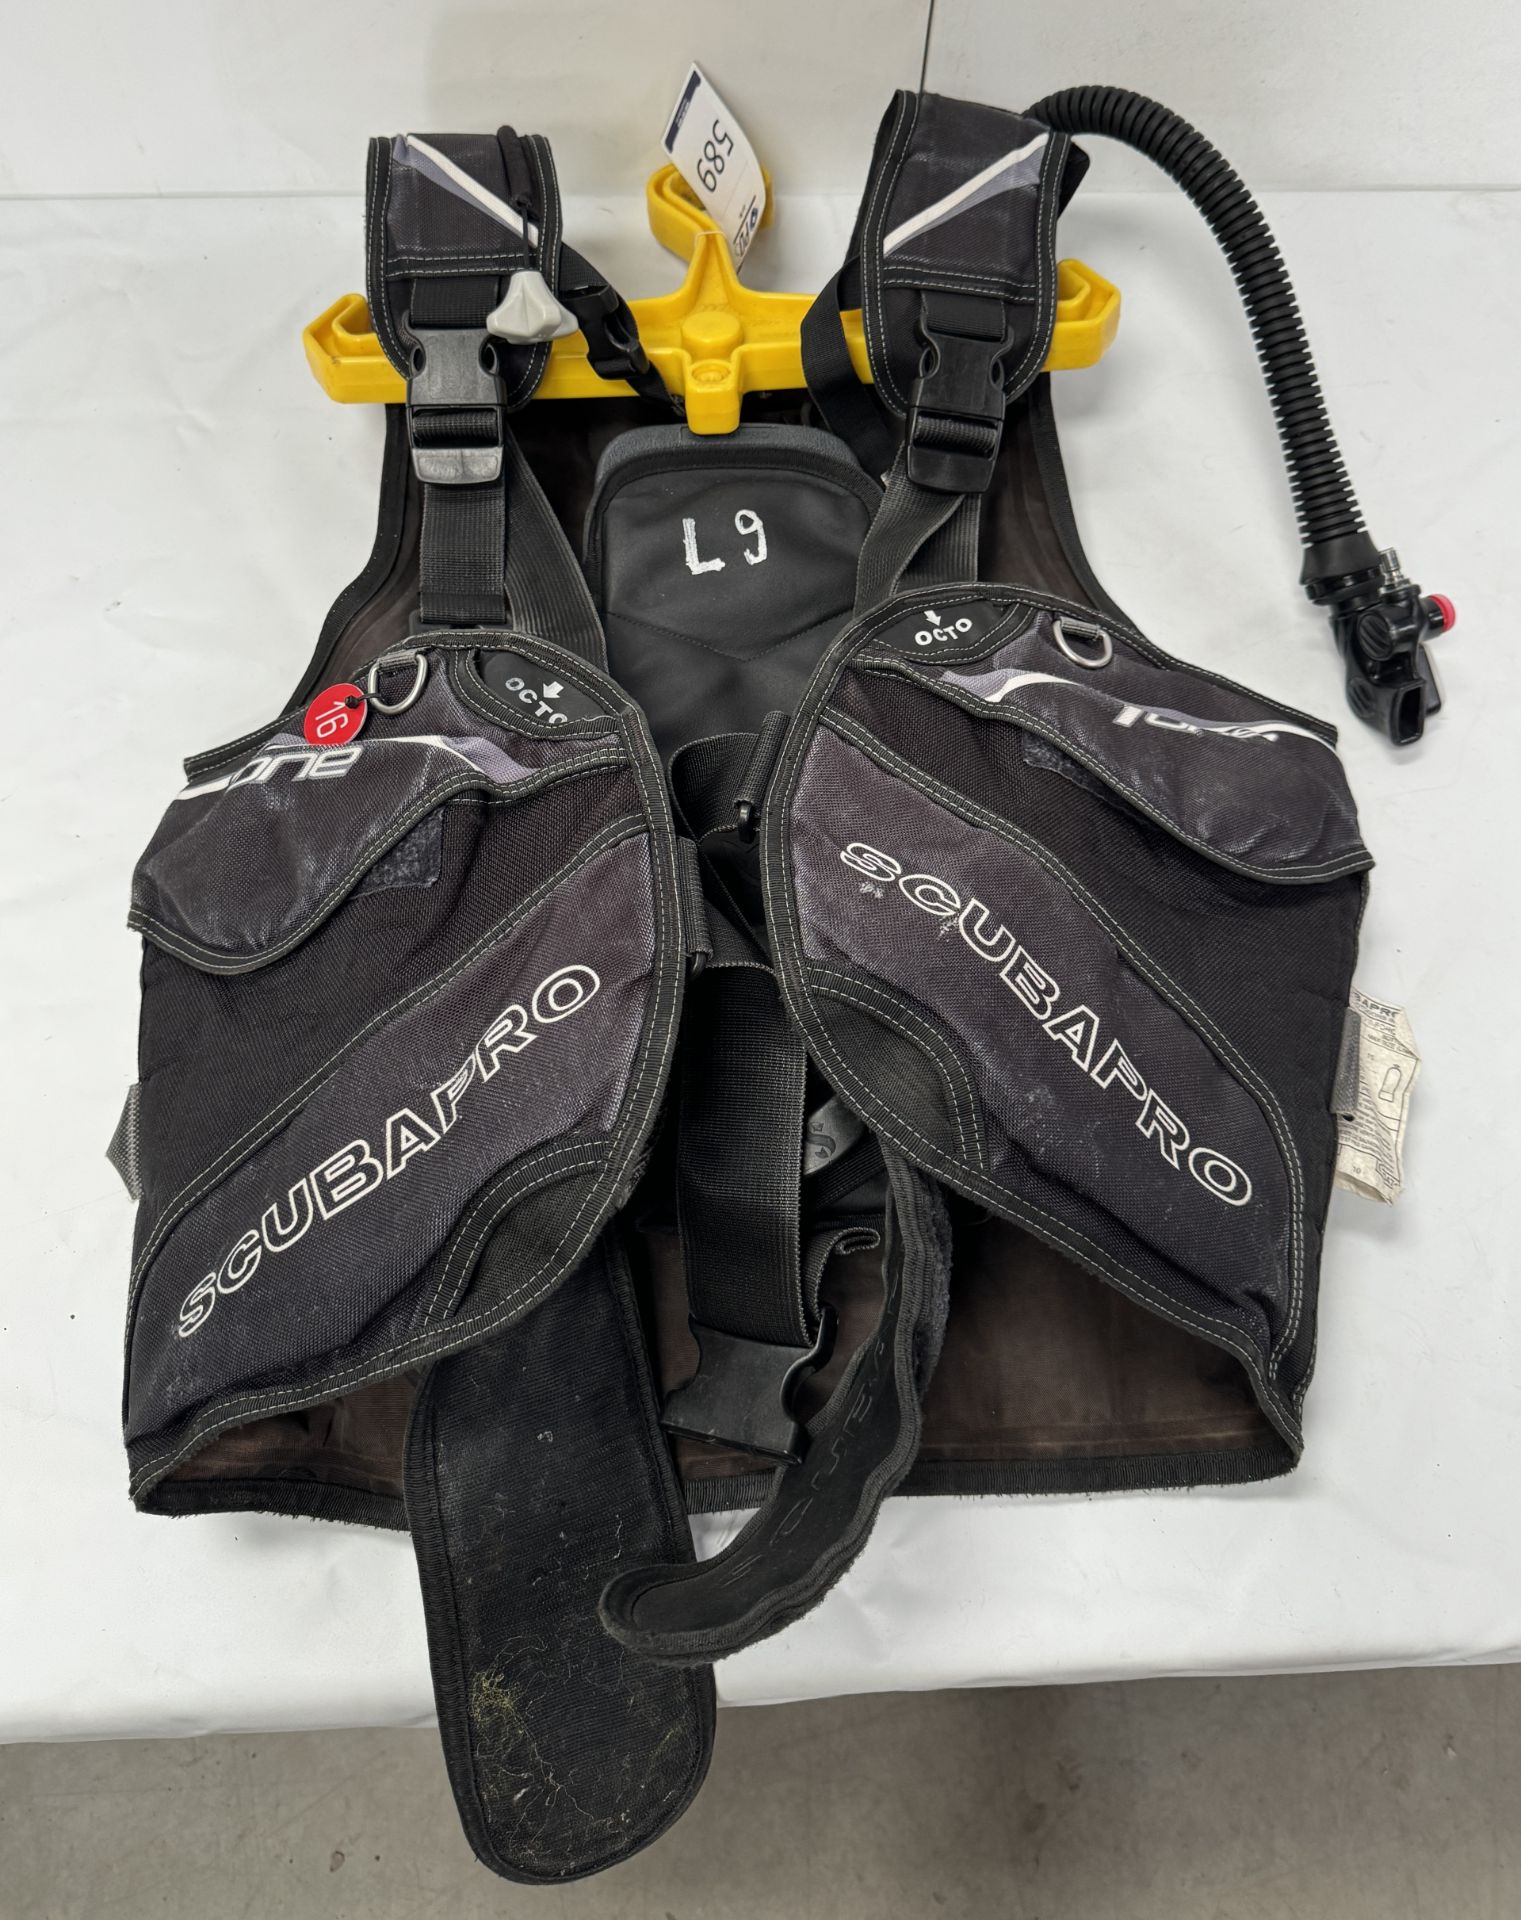 Scuba Pro One Buoyancy Compensator (Location: Brentwood. Please Refer to General Notes)